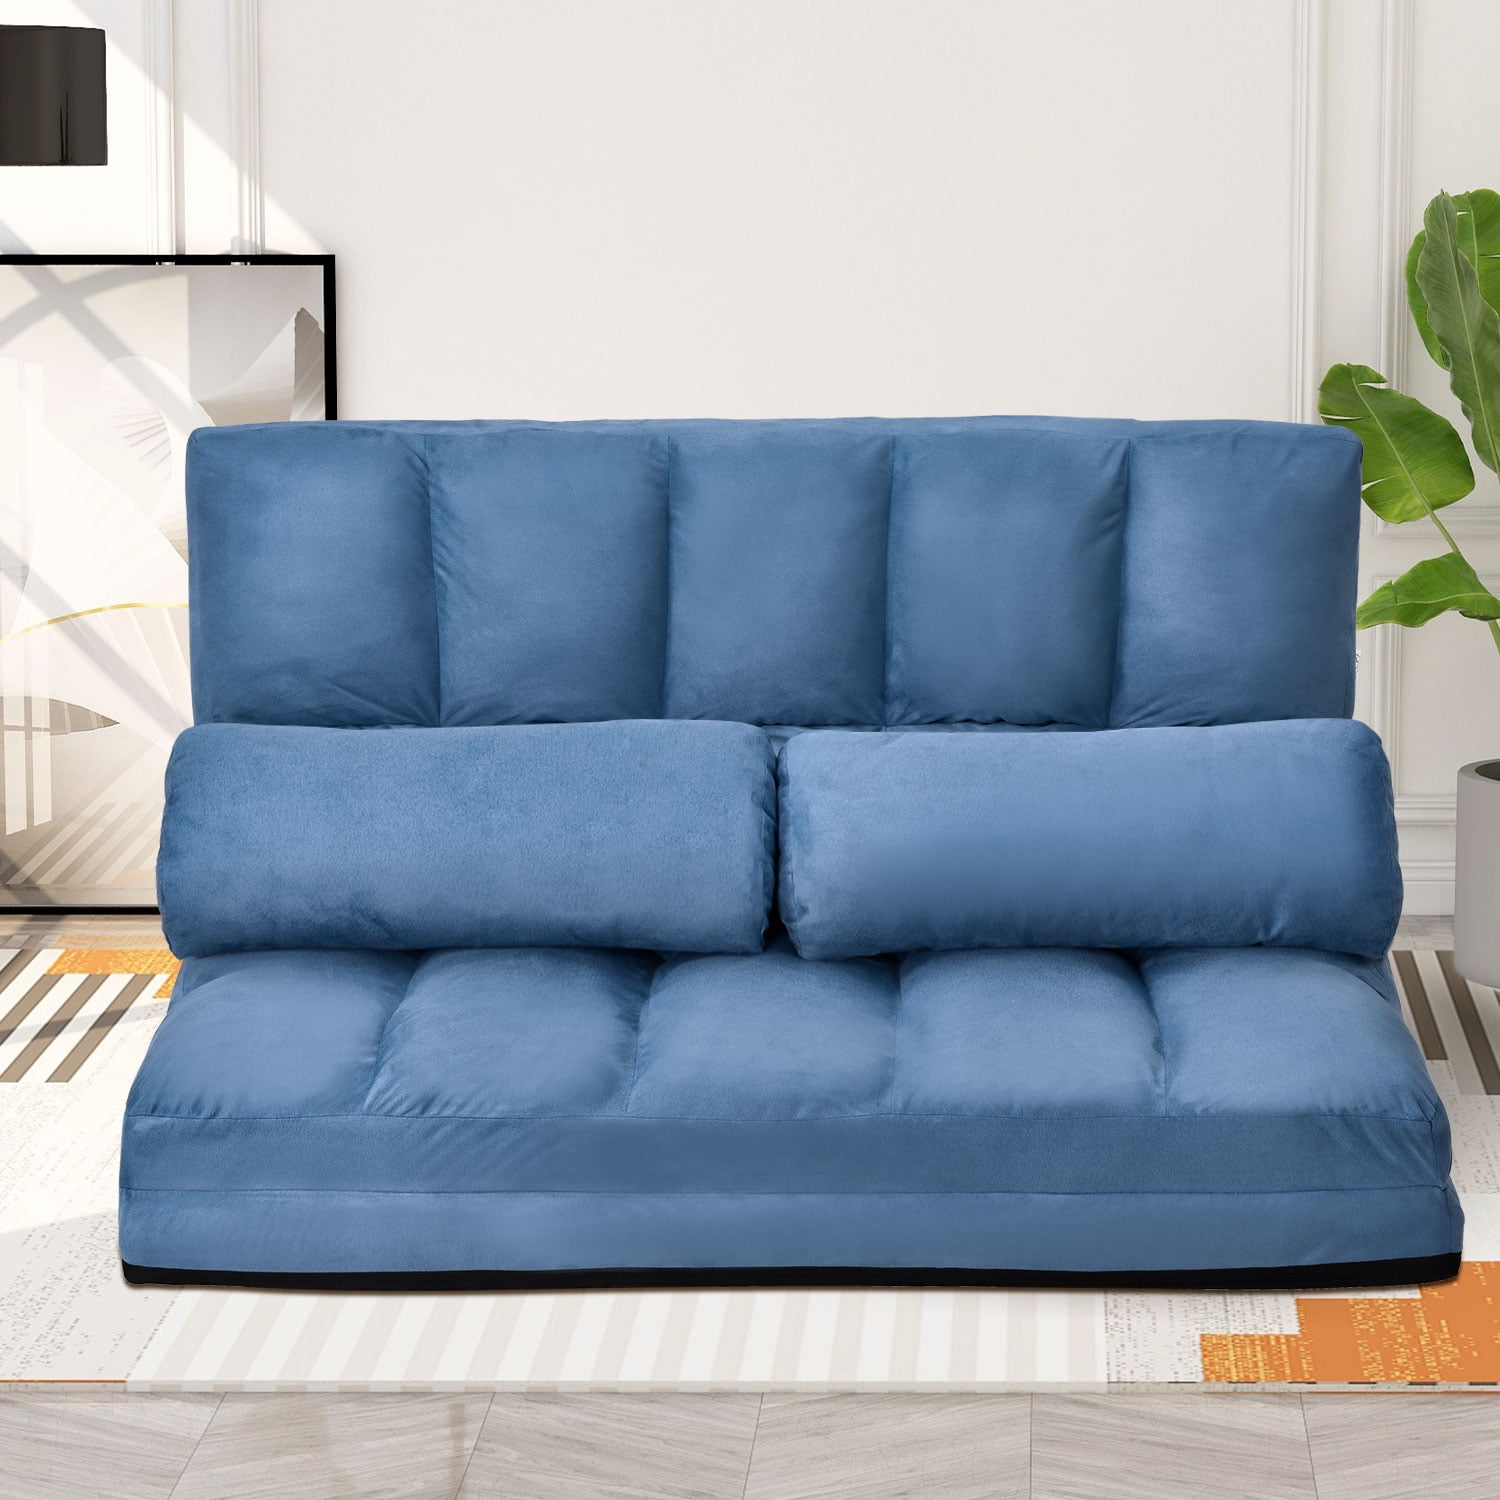 Floor Sofa with Back Support, 5 Adjustable Angles Floor Chair with